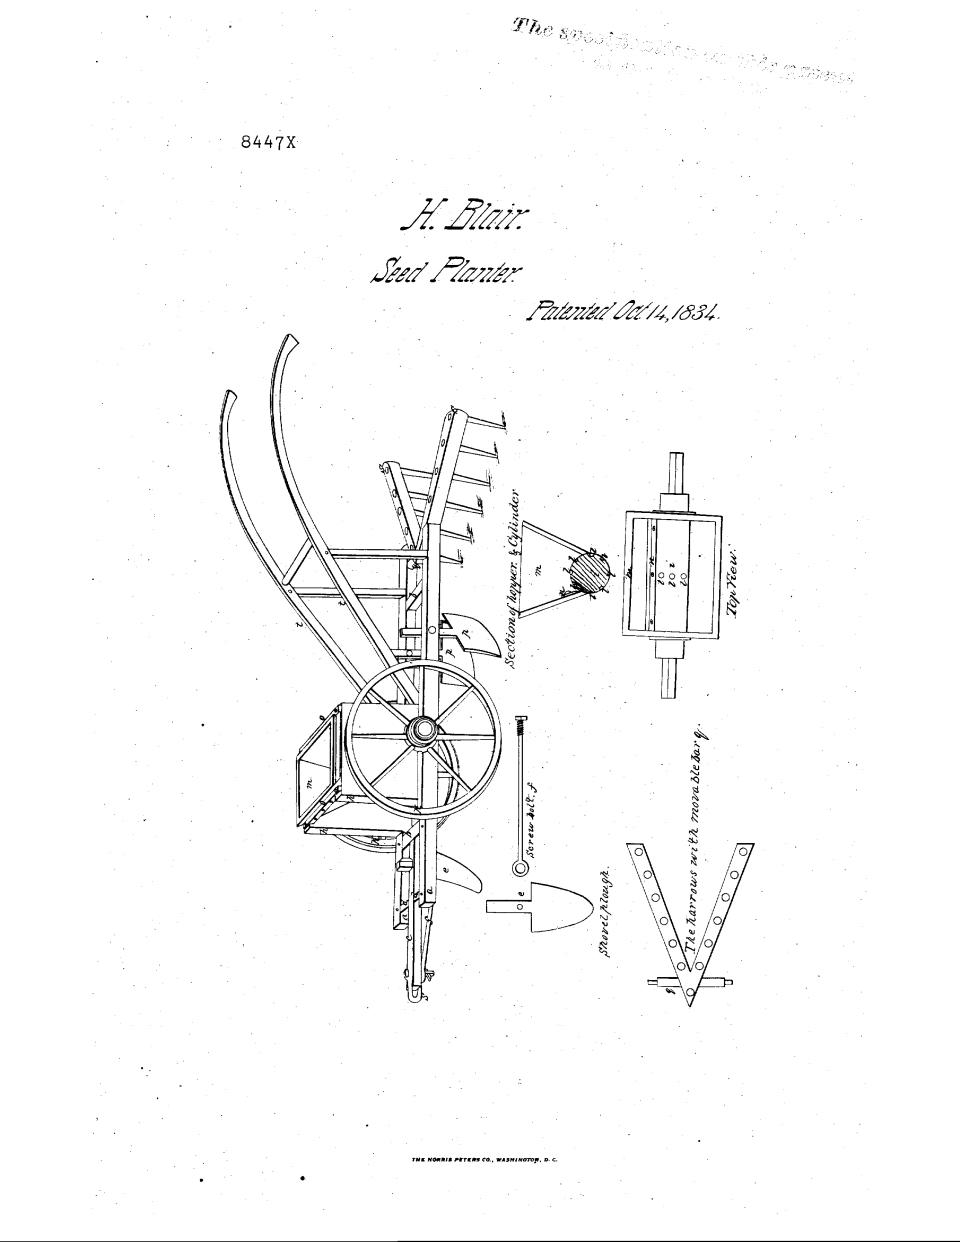 This image provided by the United States Patent and Trademarks Office shows the drawing of Henry Blair's corn planter that accompanied his patent application in 1834. (United States Patent and Trademarks Office/via AP)